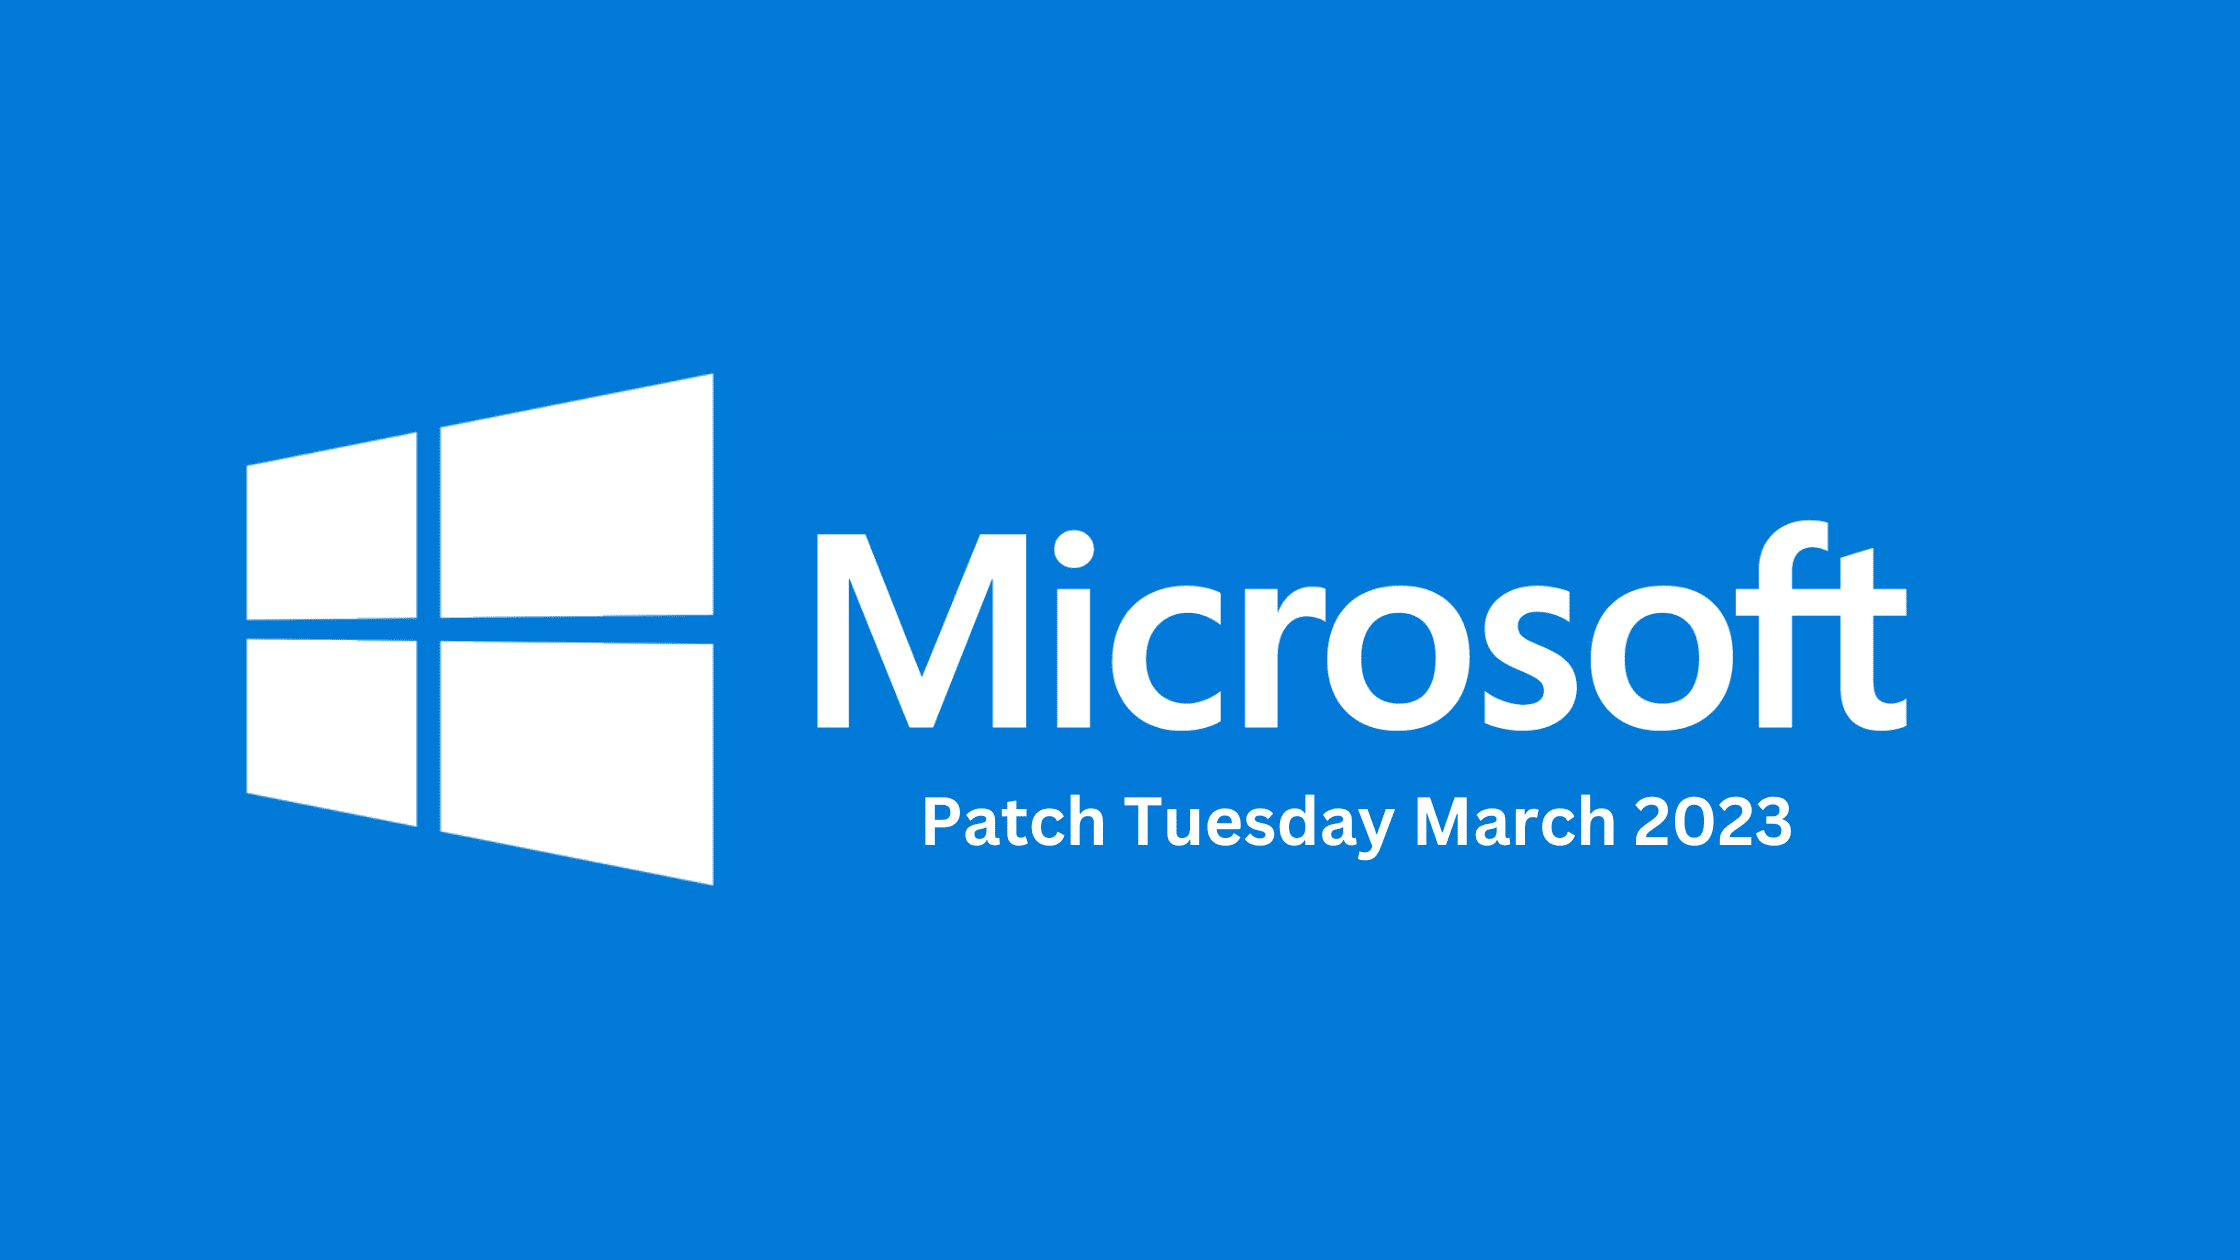 Breaking Down The Latest March 2023 Patch Tuesday Report